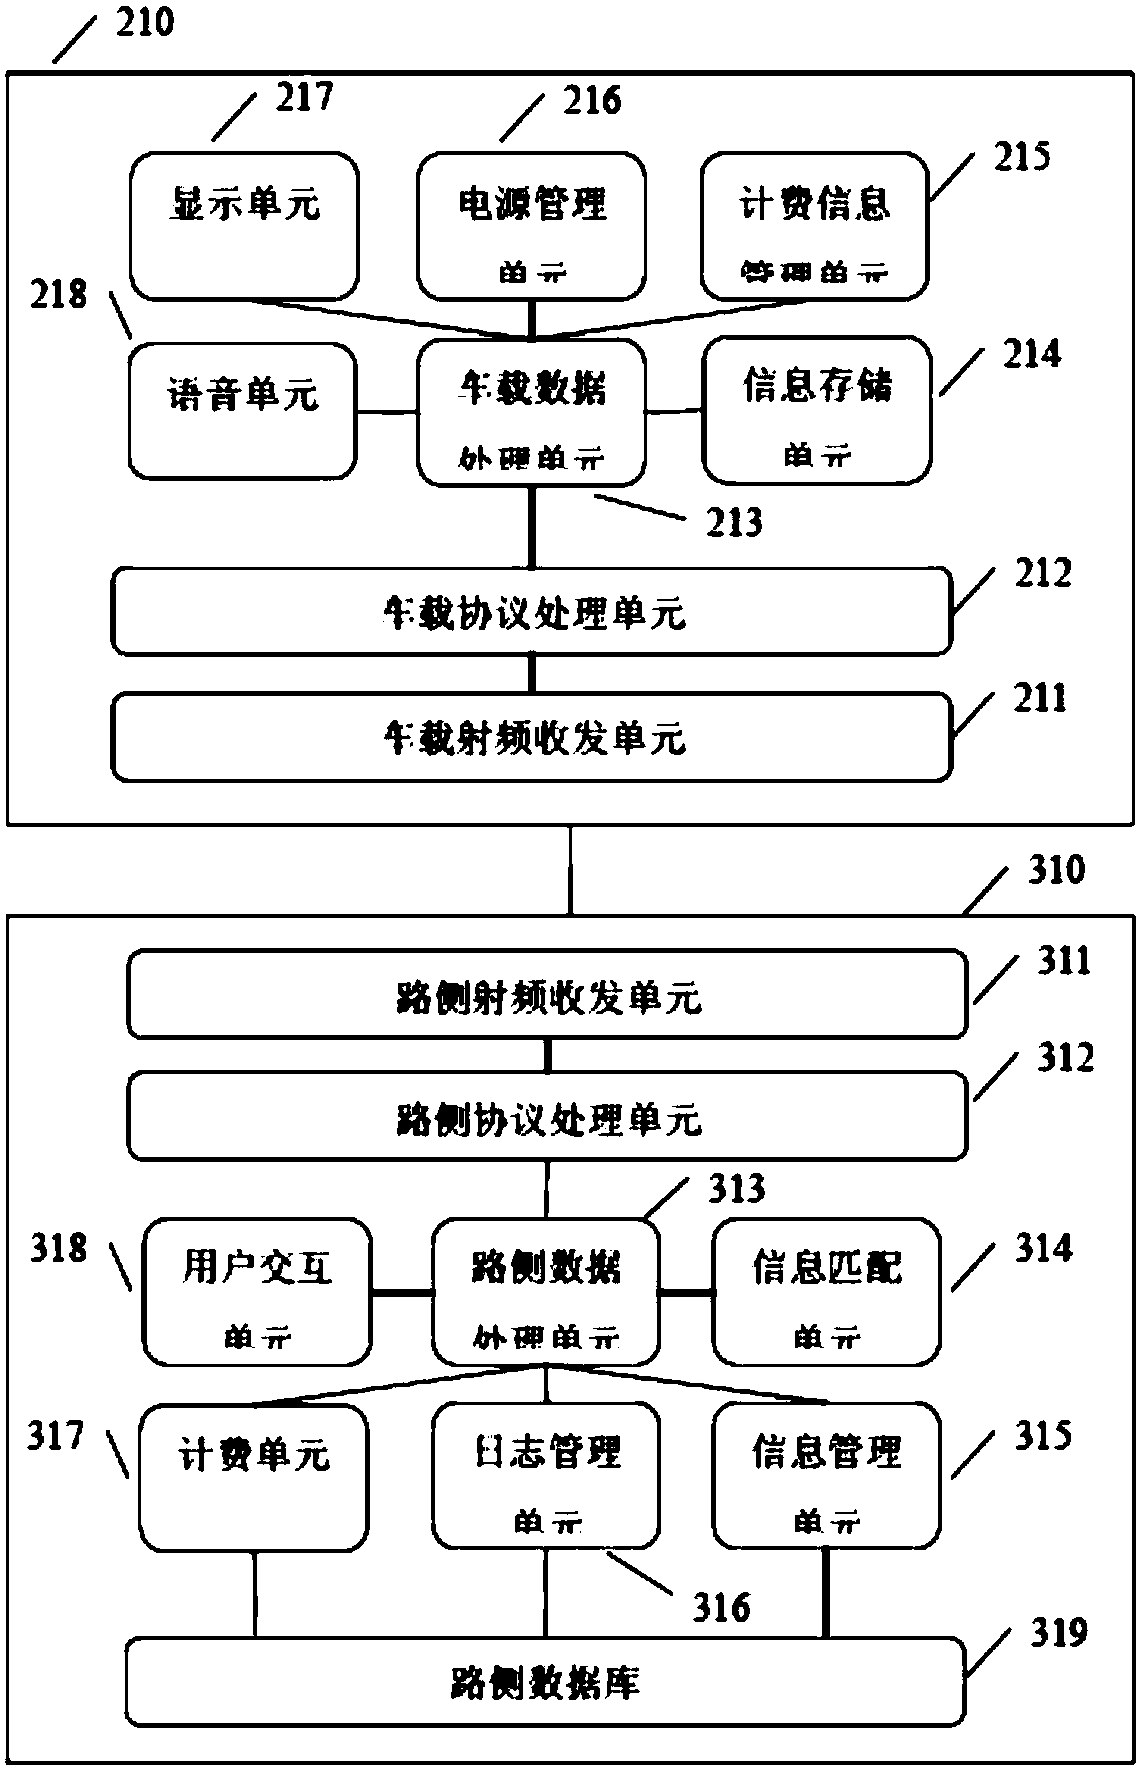 Method and system for pushing ETC (Electronic Toll of Collection) release information